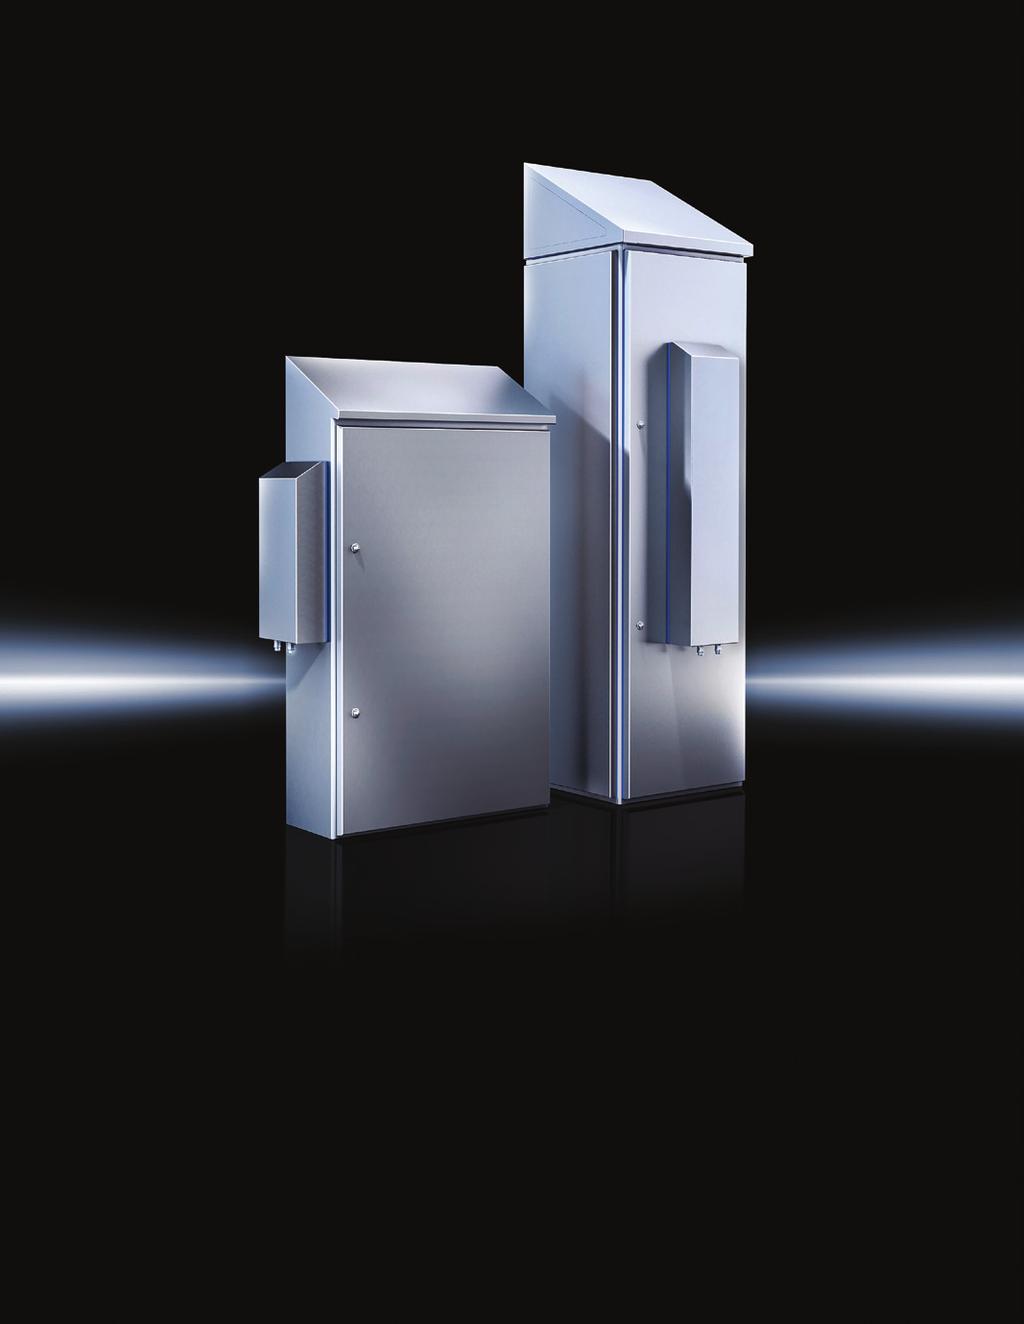 Air/Water Heat Exchangers Hygienic Design An easy-to-clean enclosure climate control solution